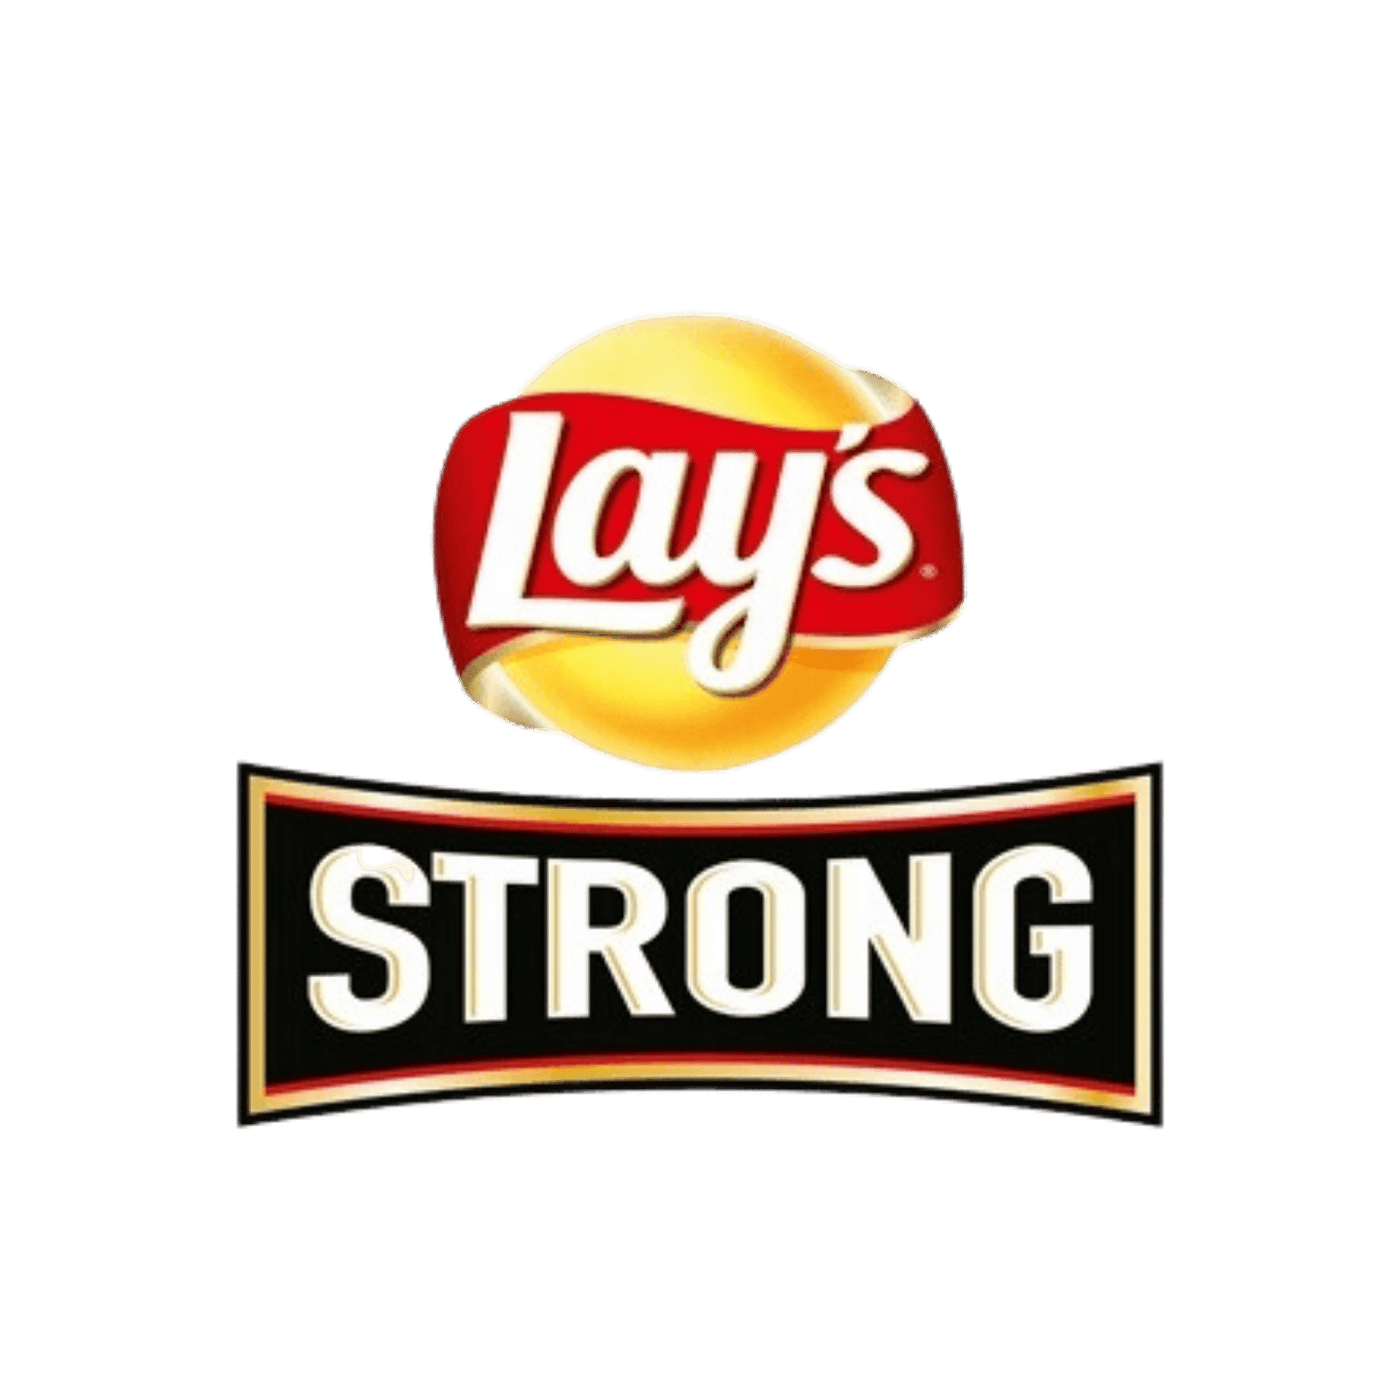 Lay's Strong